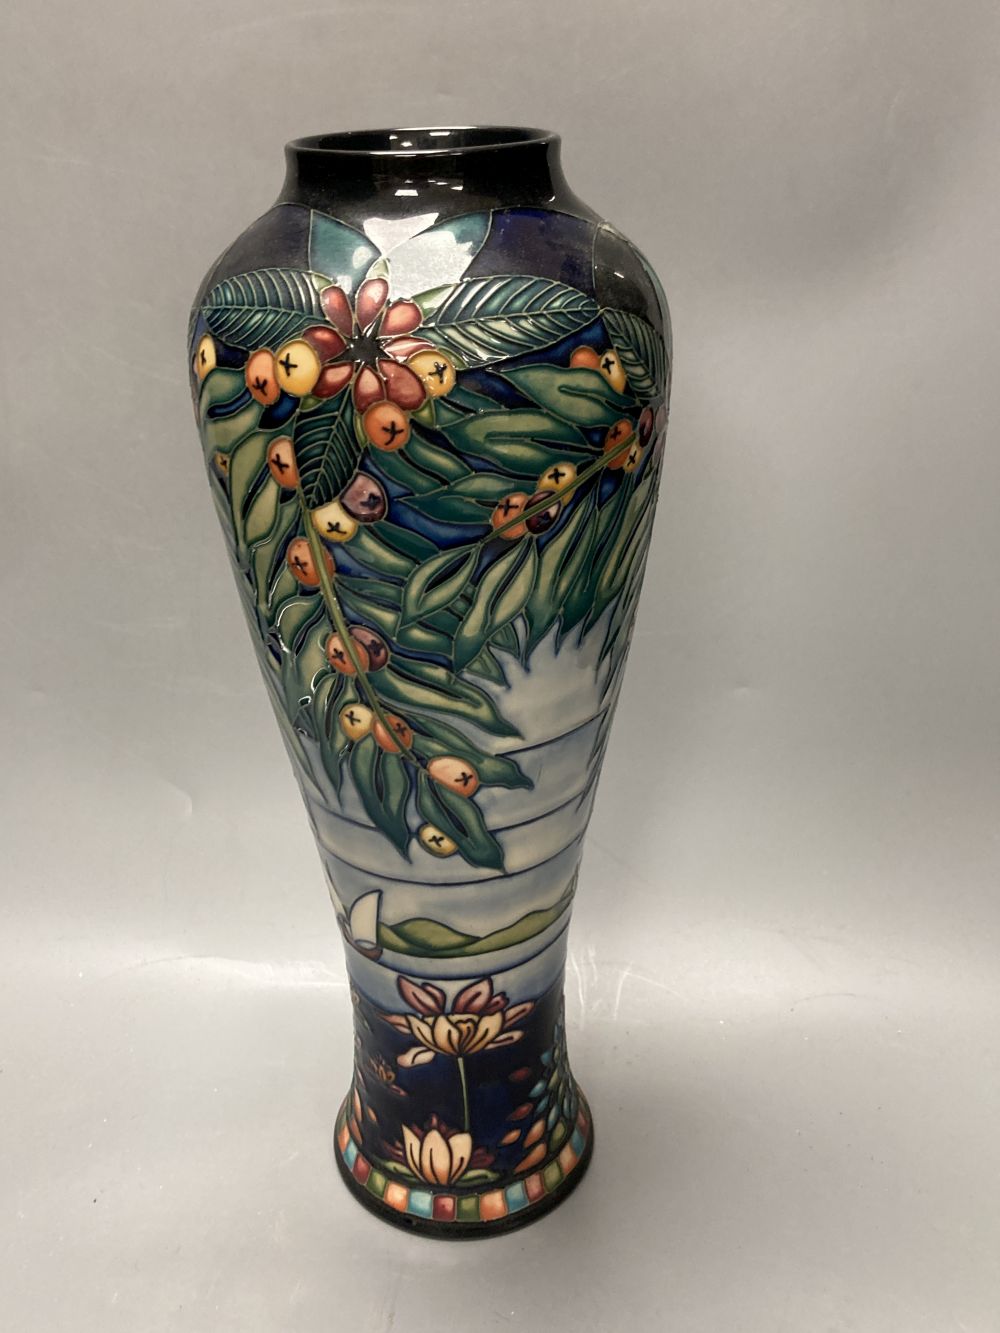 A Moorcroft vase, Serendipity pattern, designed by Nicola Slaney, limited edition number 94 of 300, signed and dated 2000, height 38